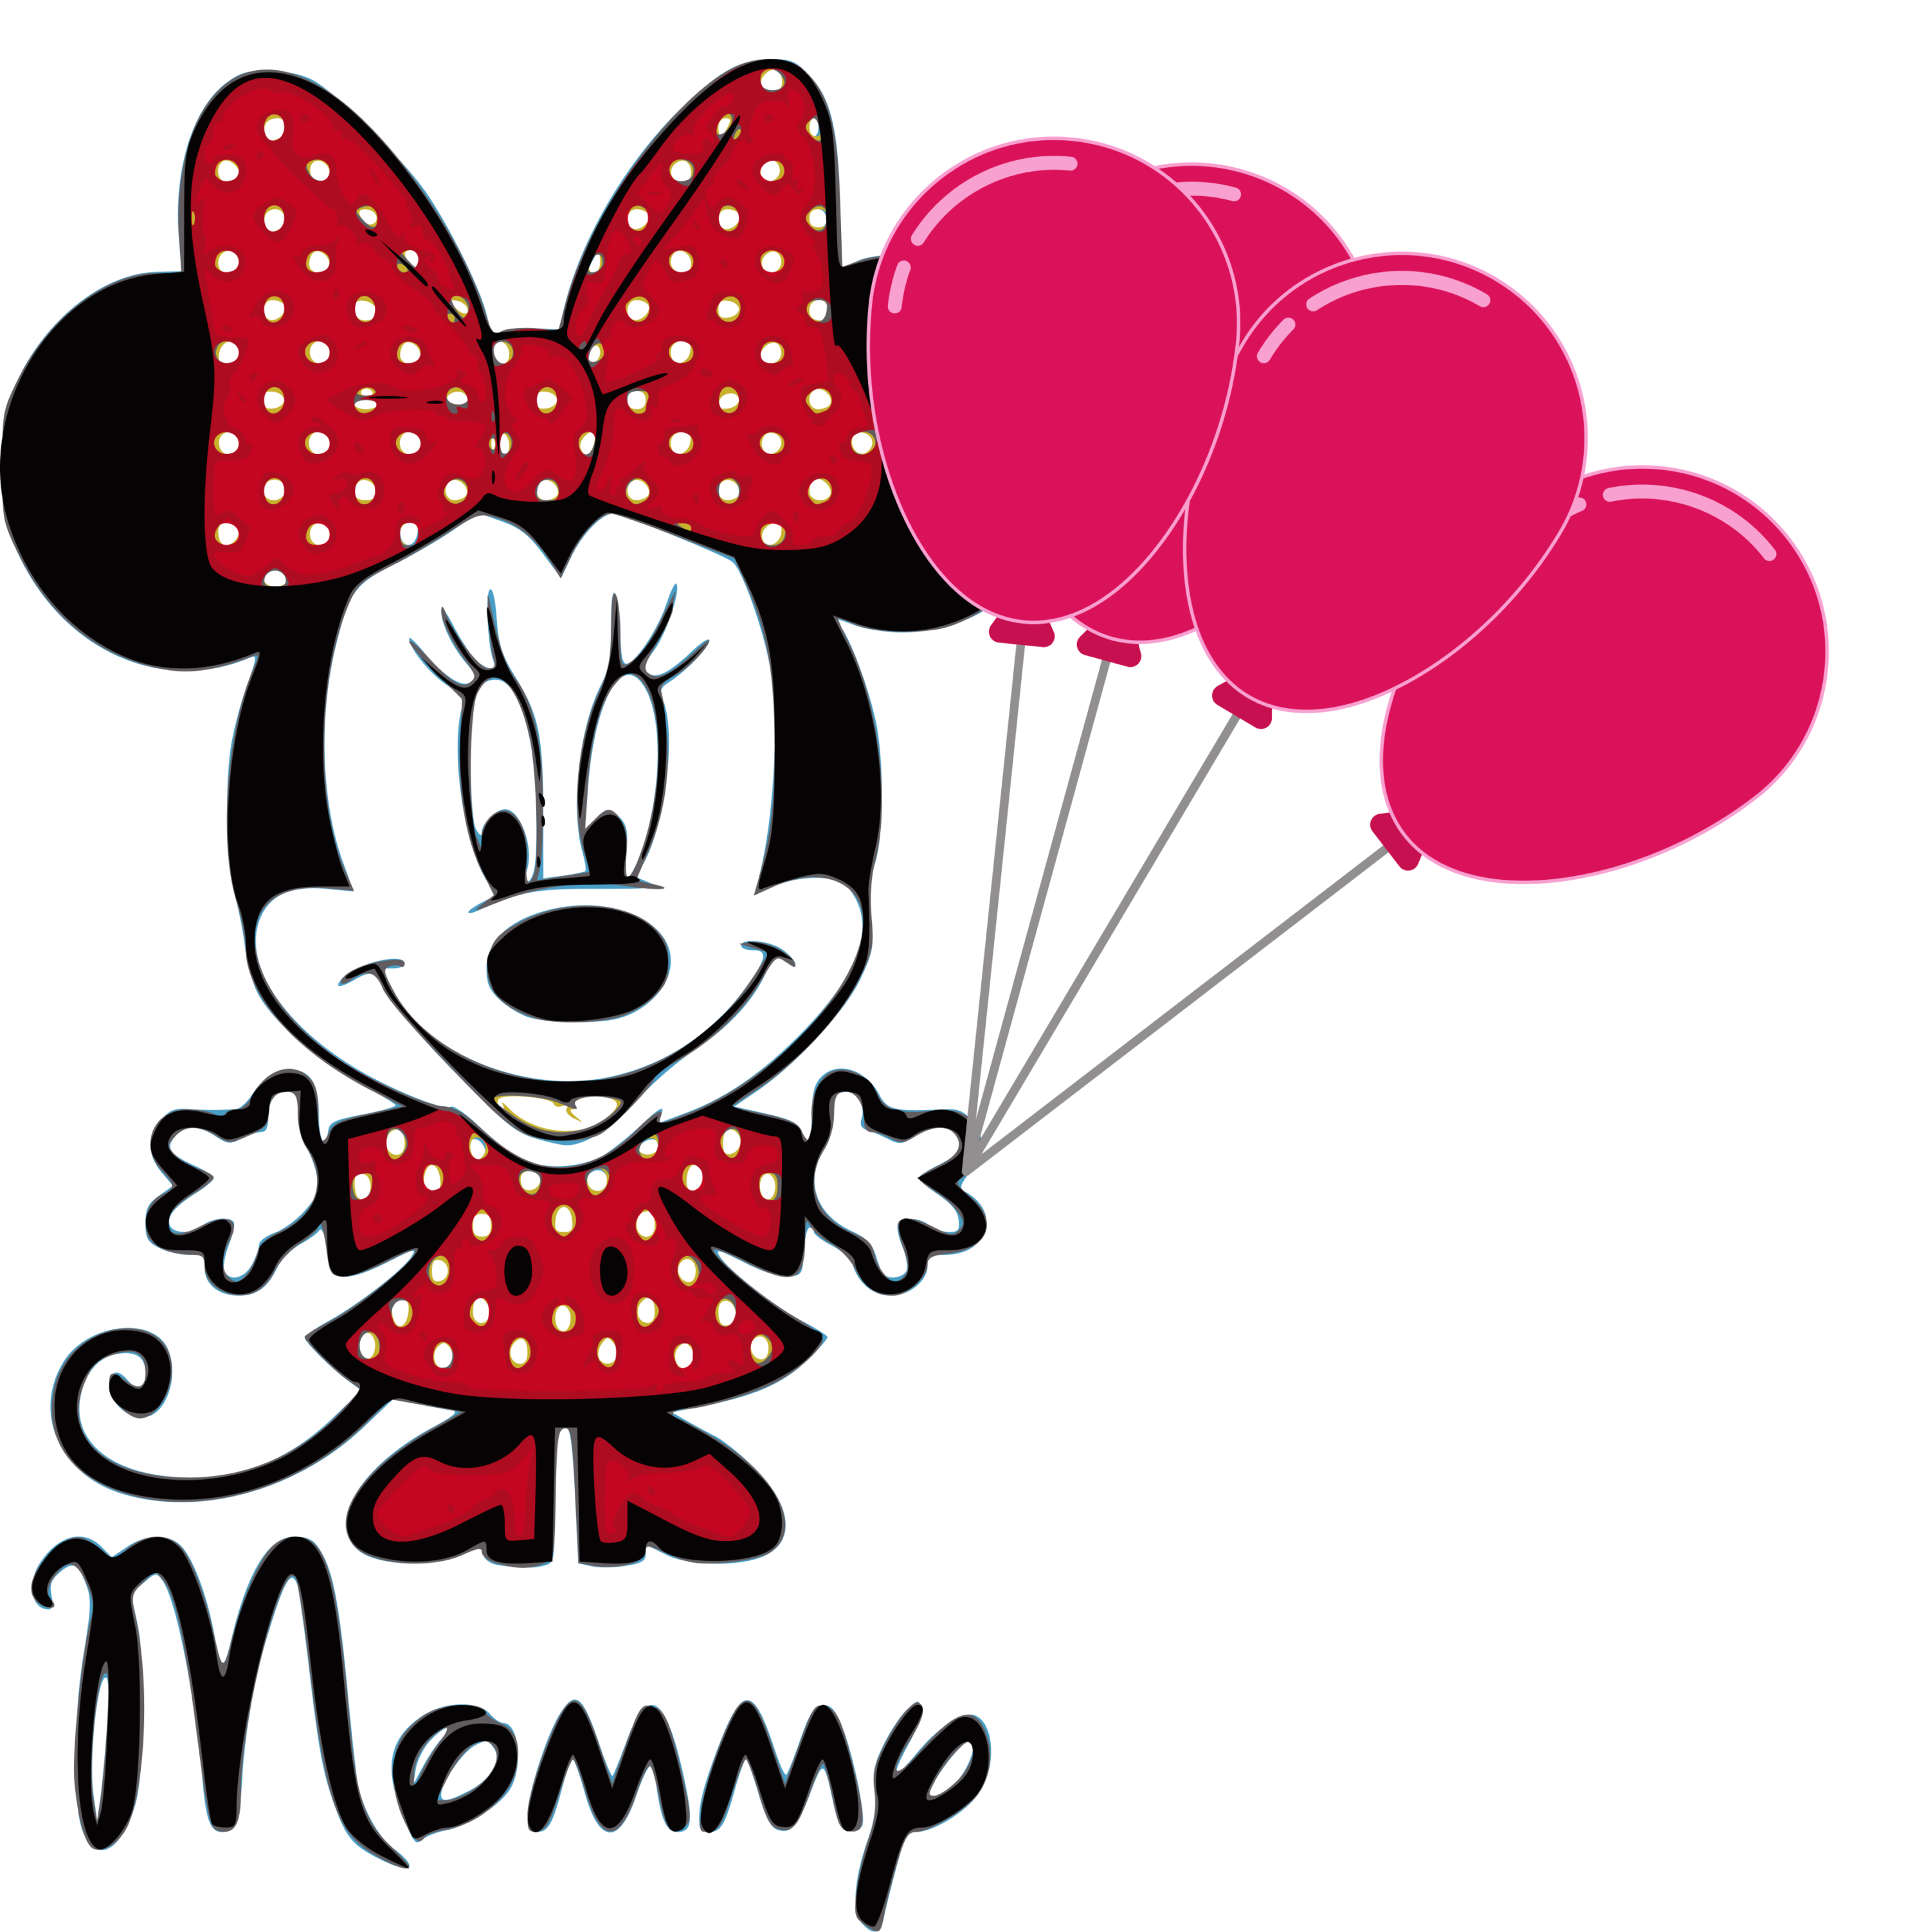 Colorful image birthday of Minnie Mouse with balloons.